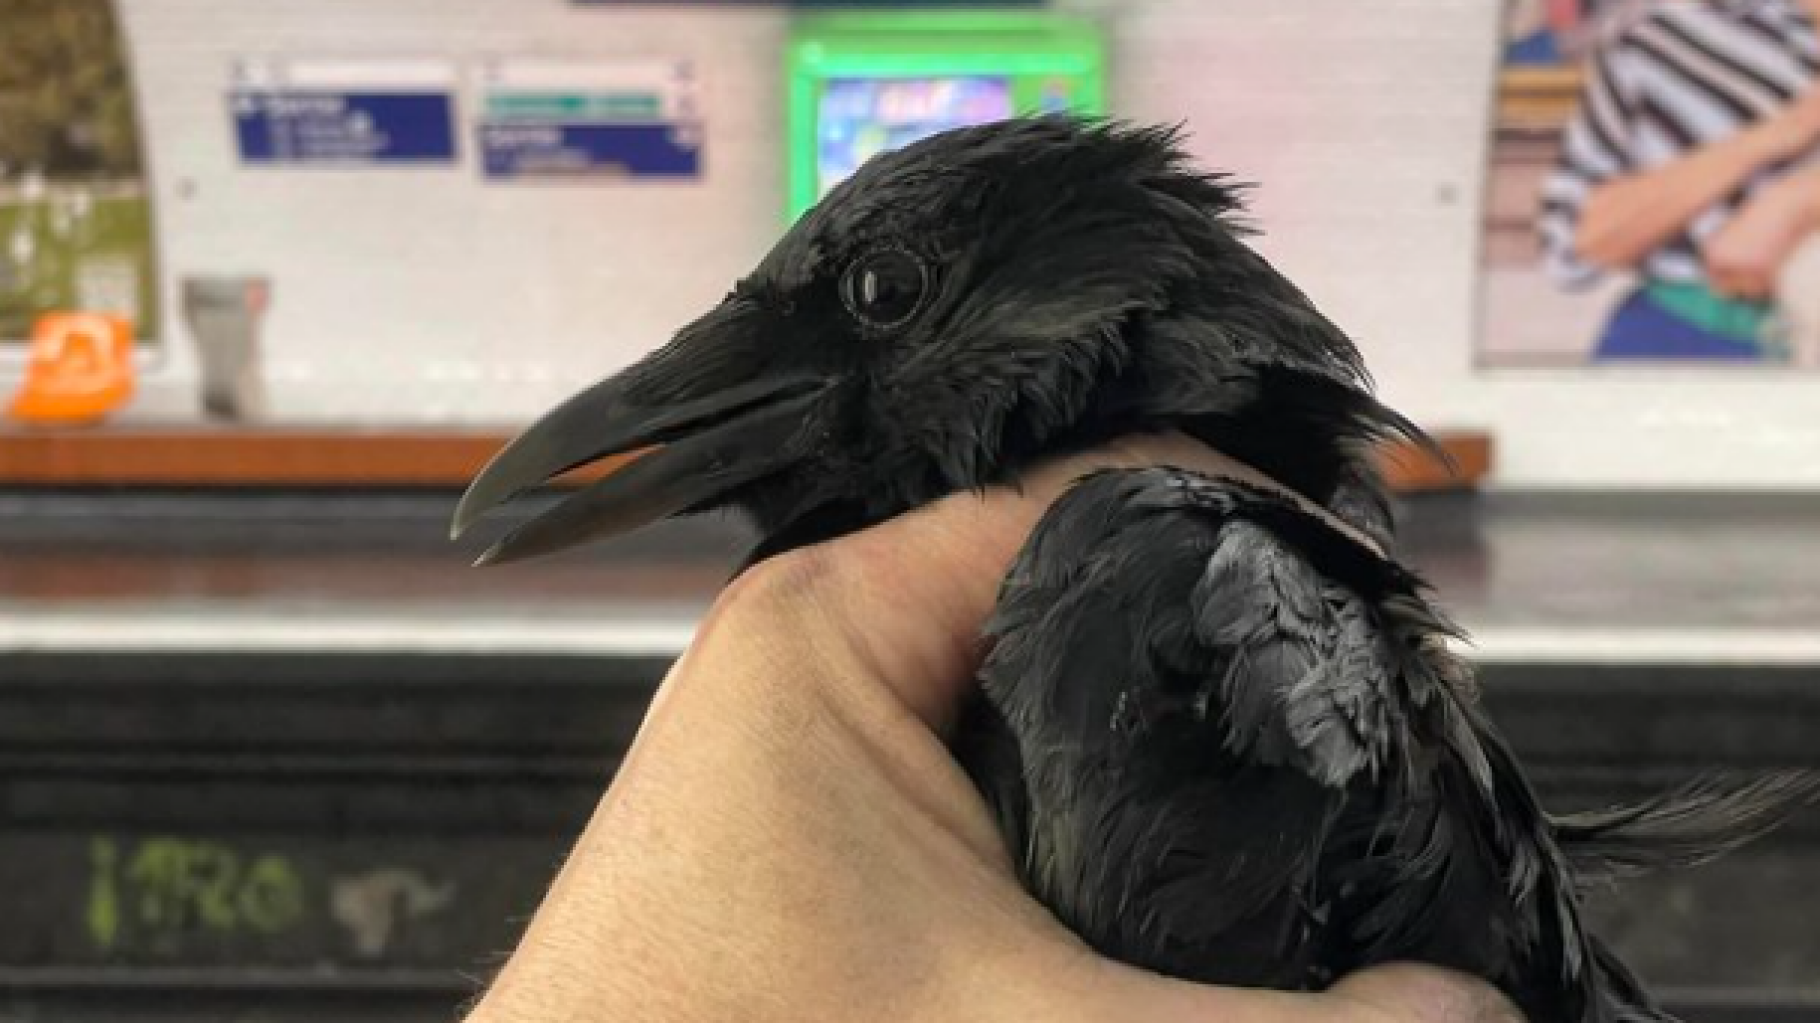 The Parisian Ringed Crows: Story of the Rescued Crow in a Paris Metro Station - Archyde